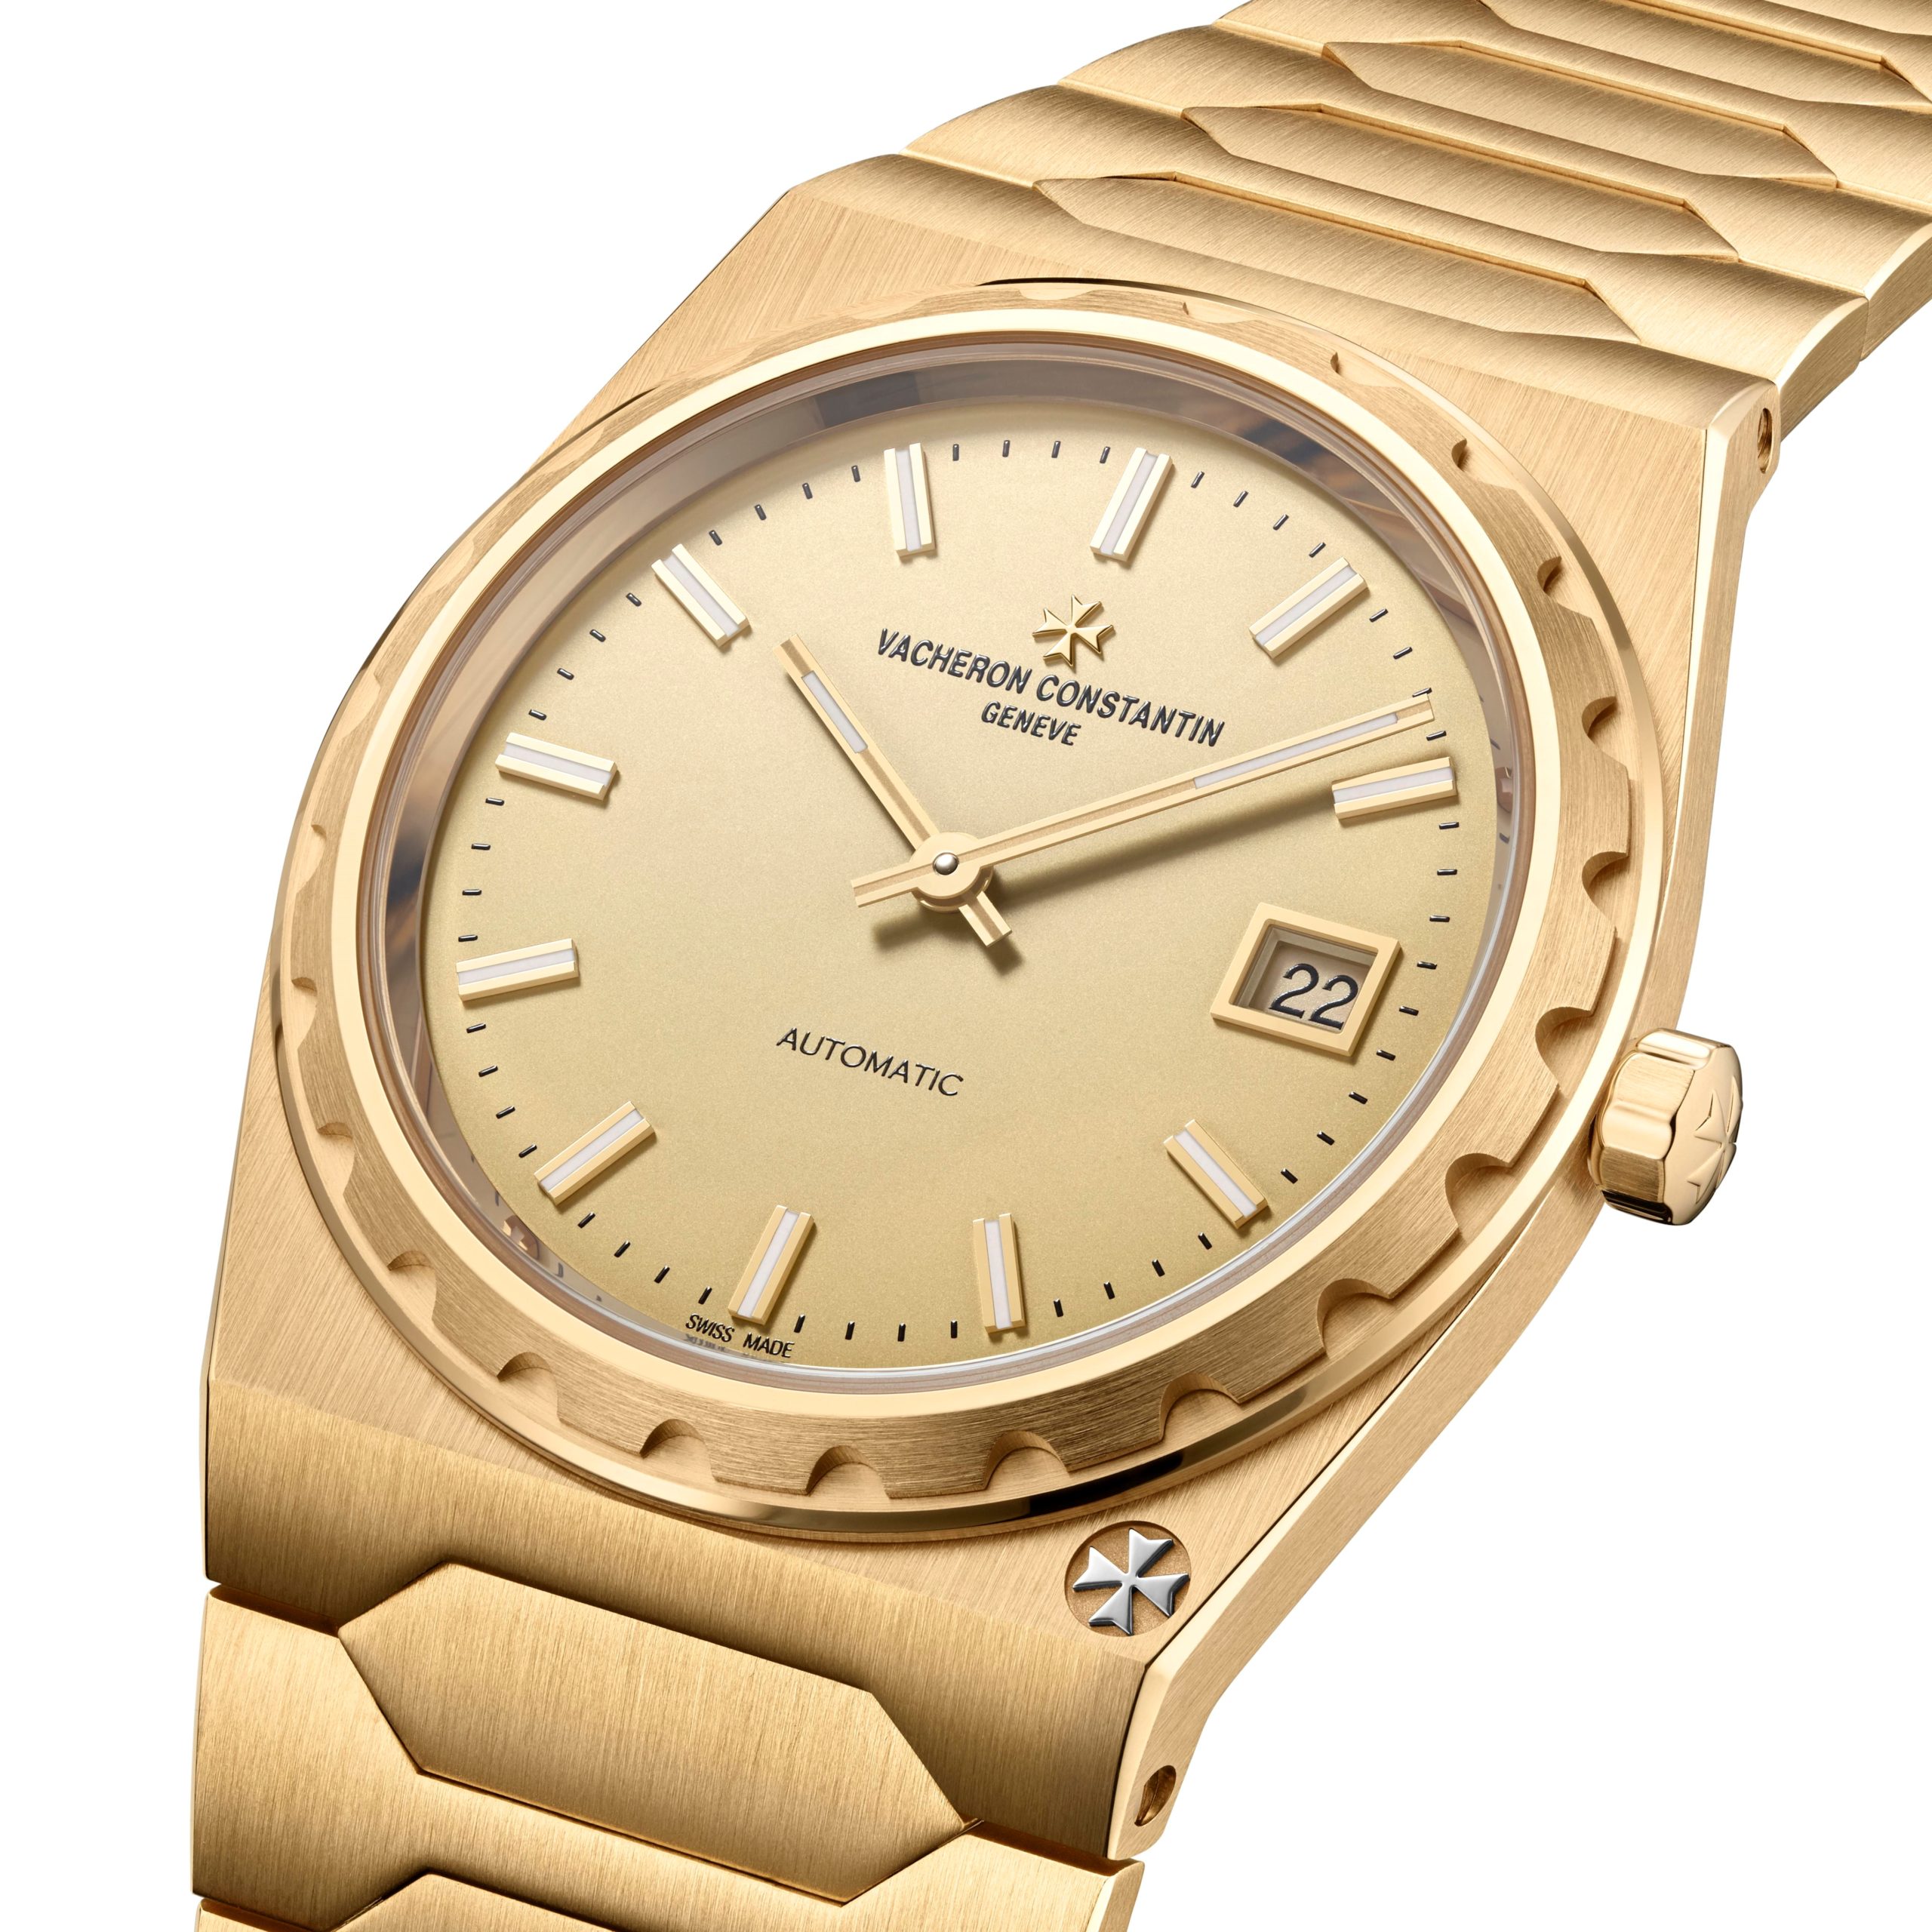 shining-gold-at-watches-wonders-vacheron-constantin-s-revived-222